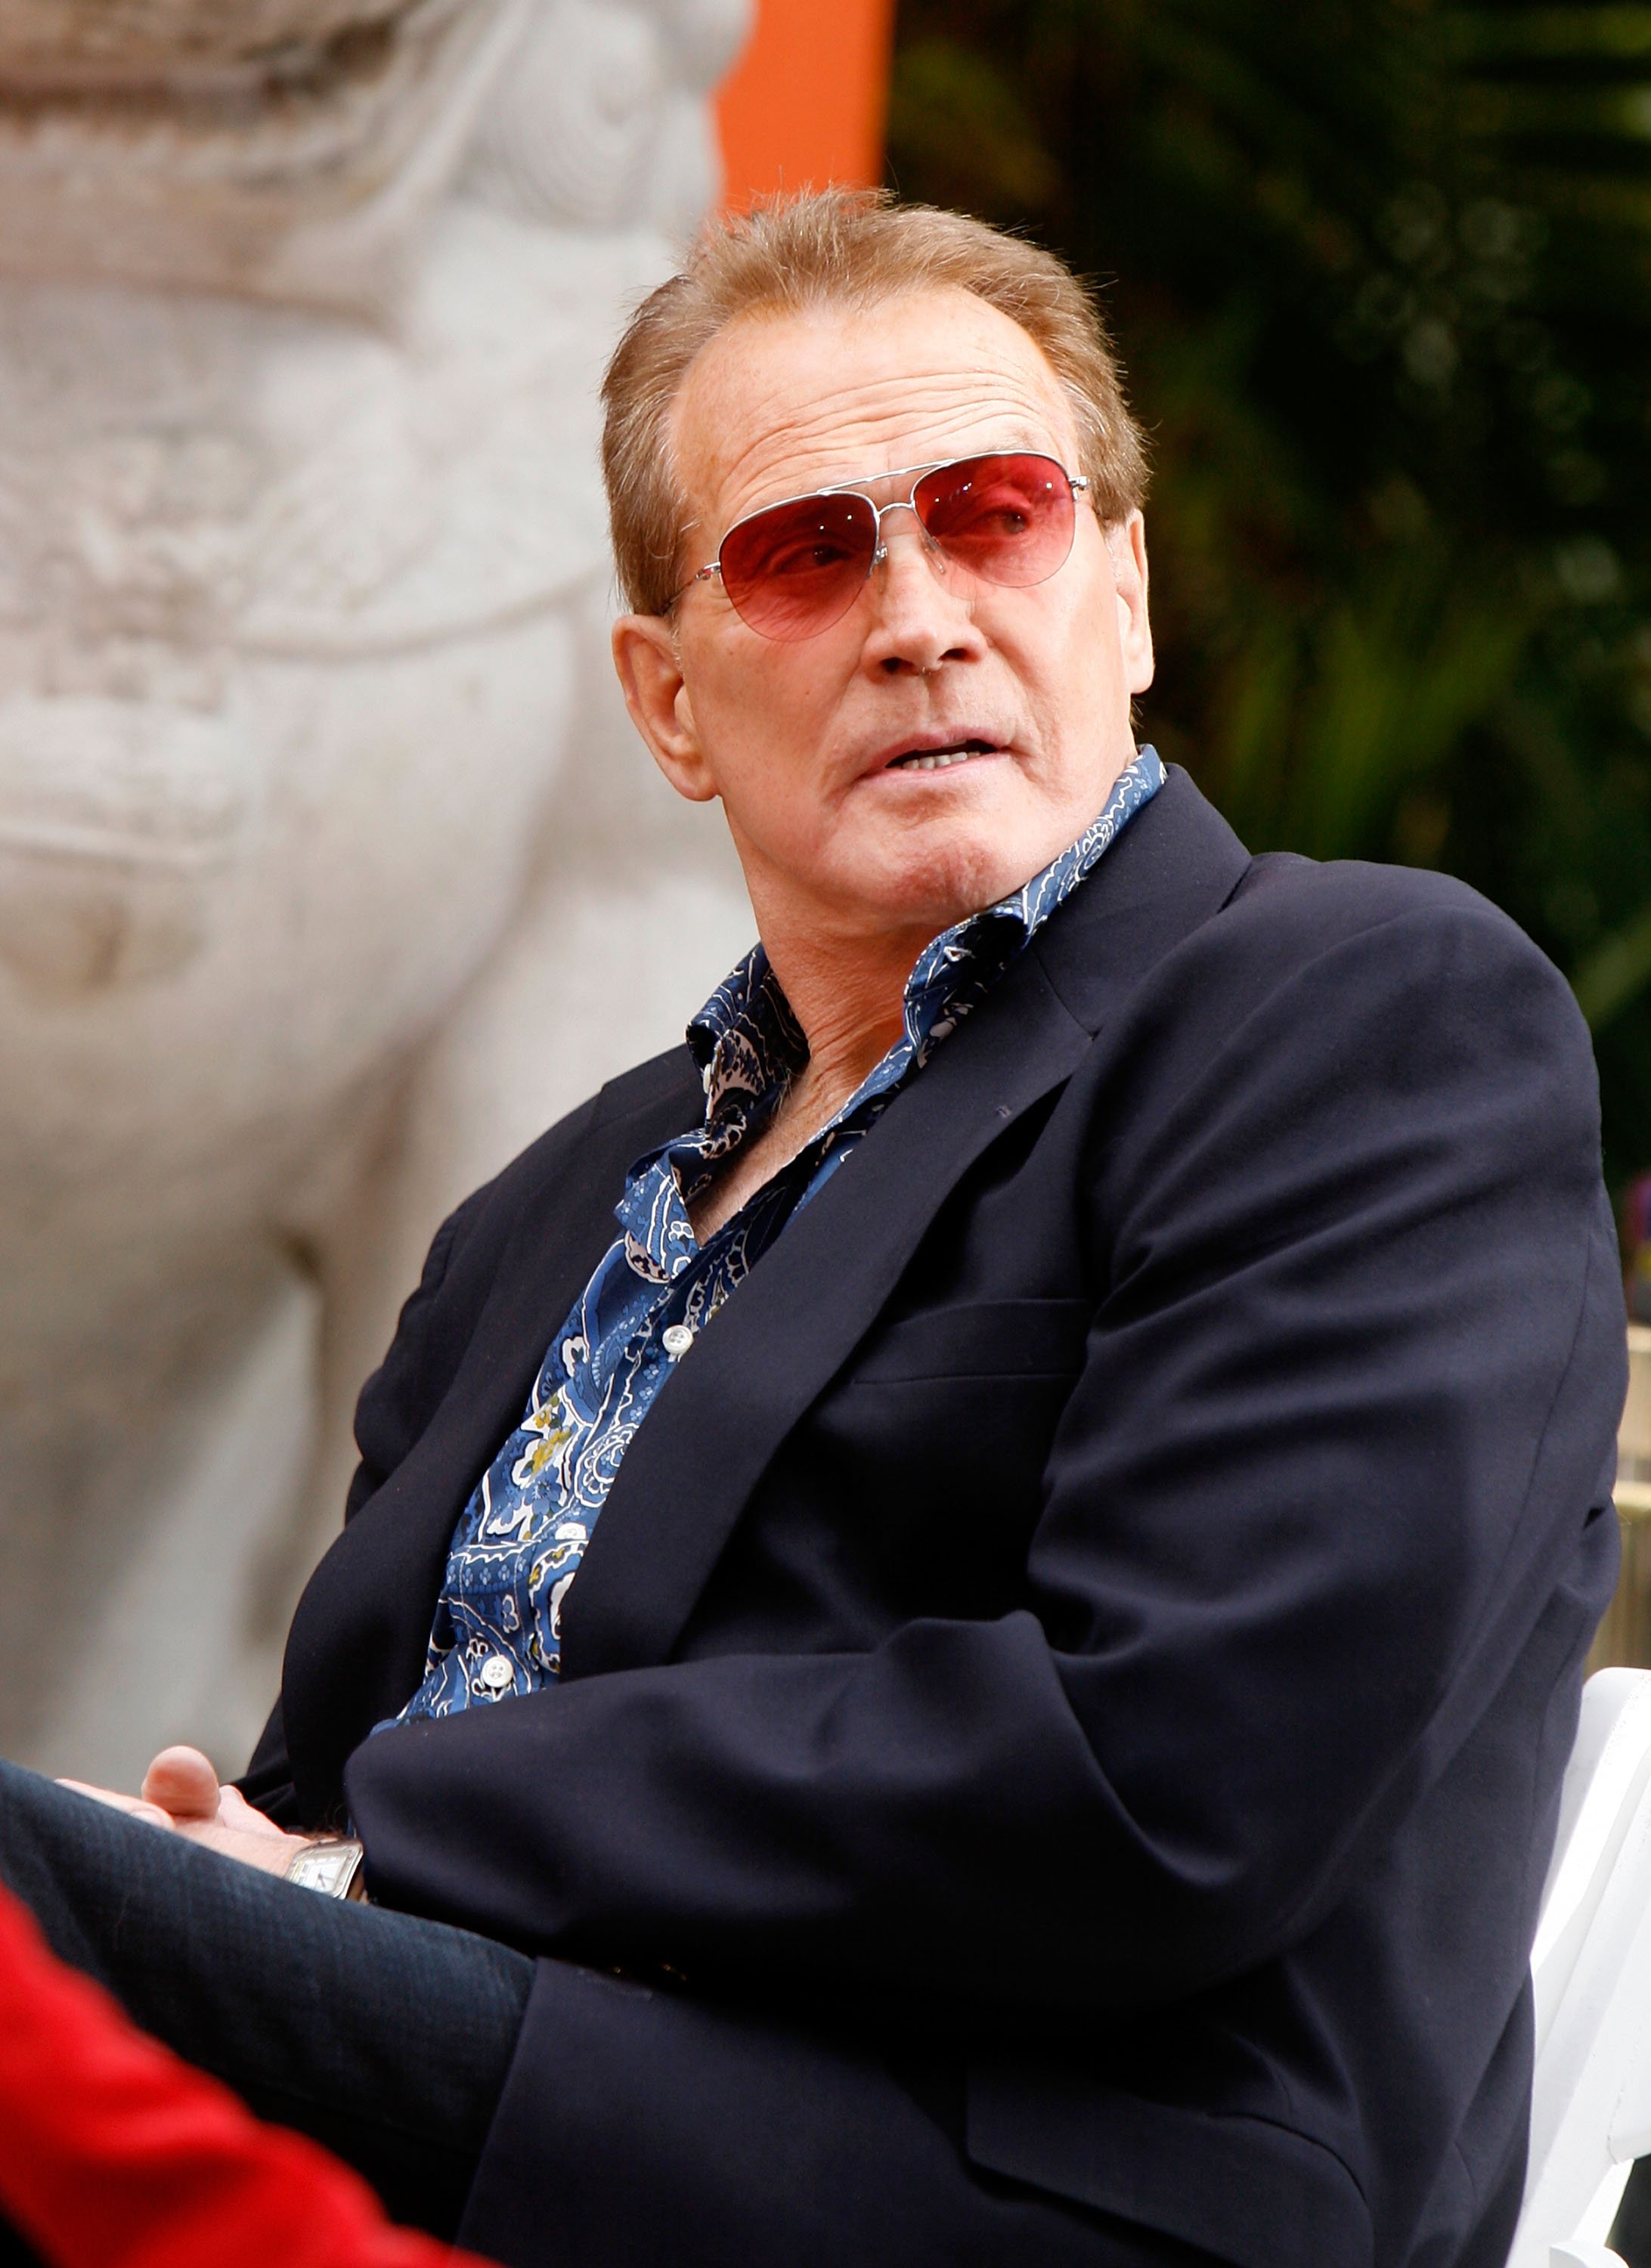  Lee Majors attends the Hand and Footprints Ceremony at Grauman's Chinese Theatre on June 5, 2007 | Photo: GettyImages